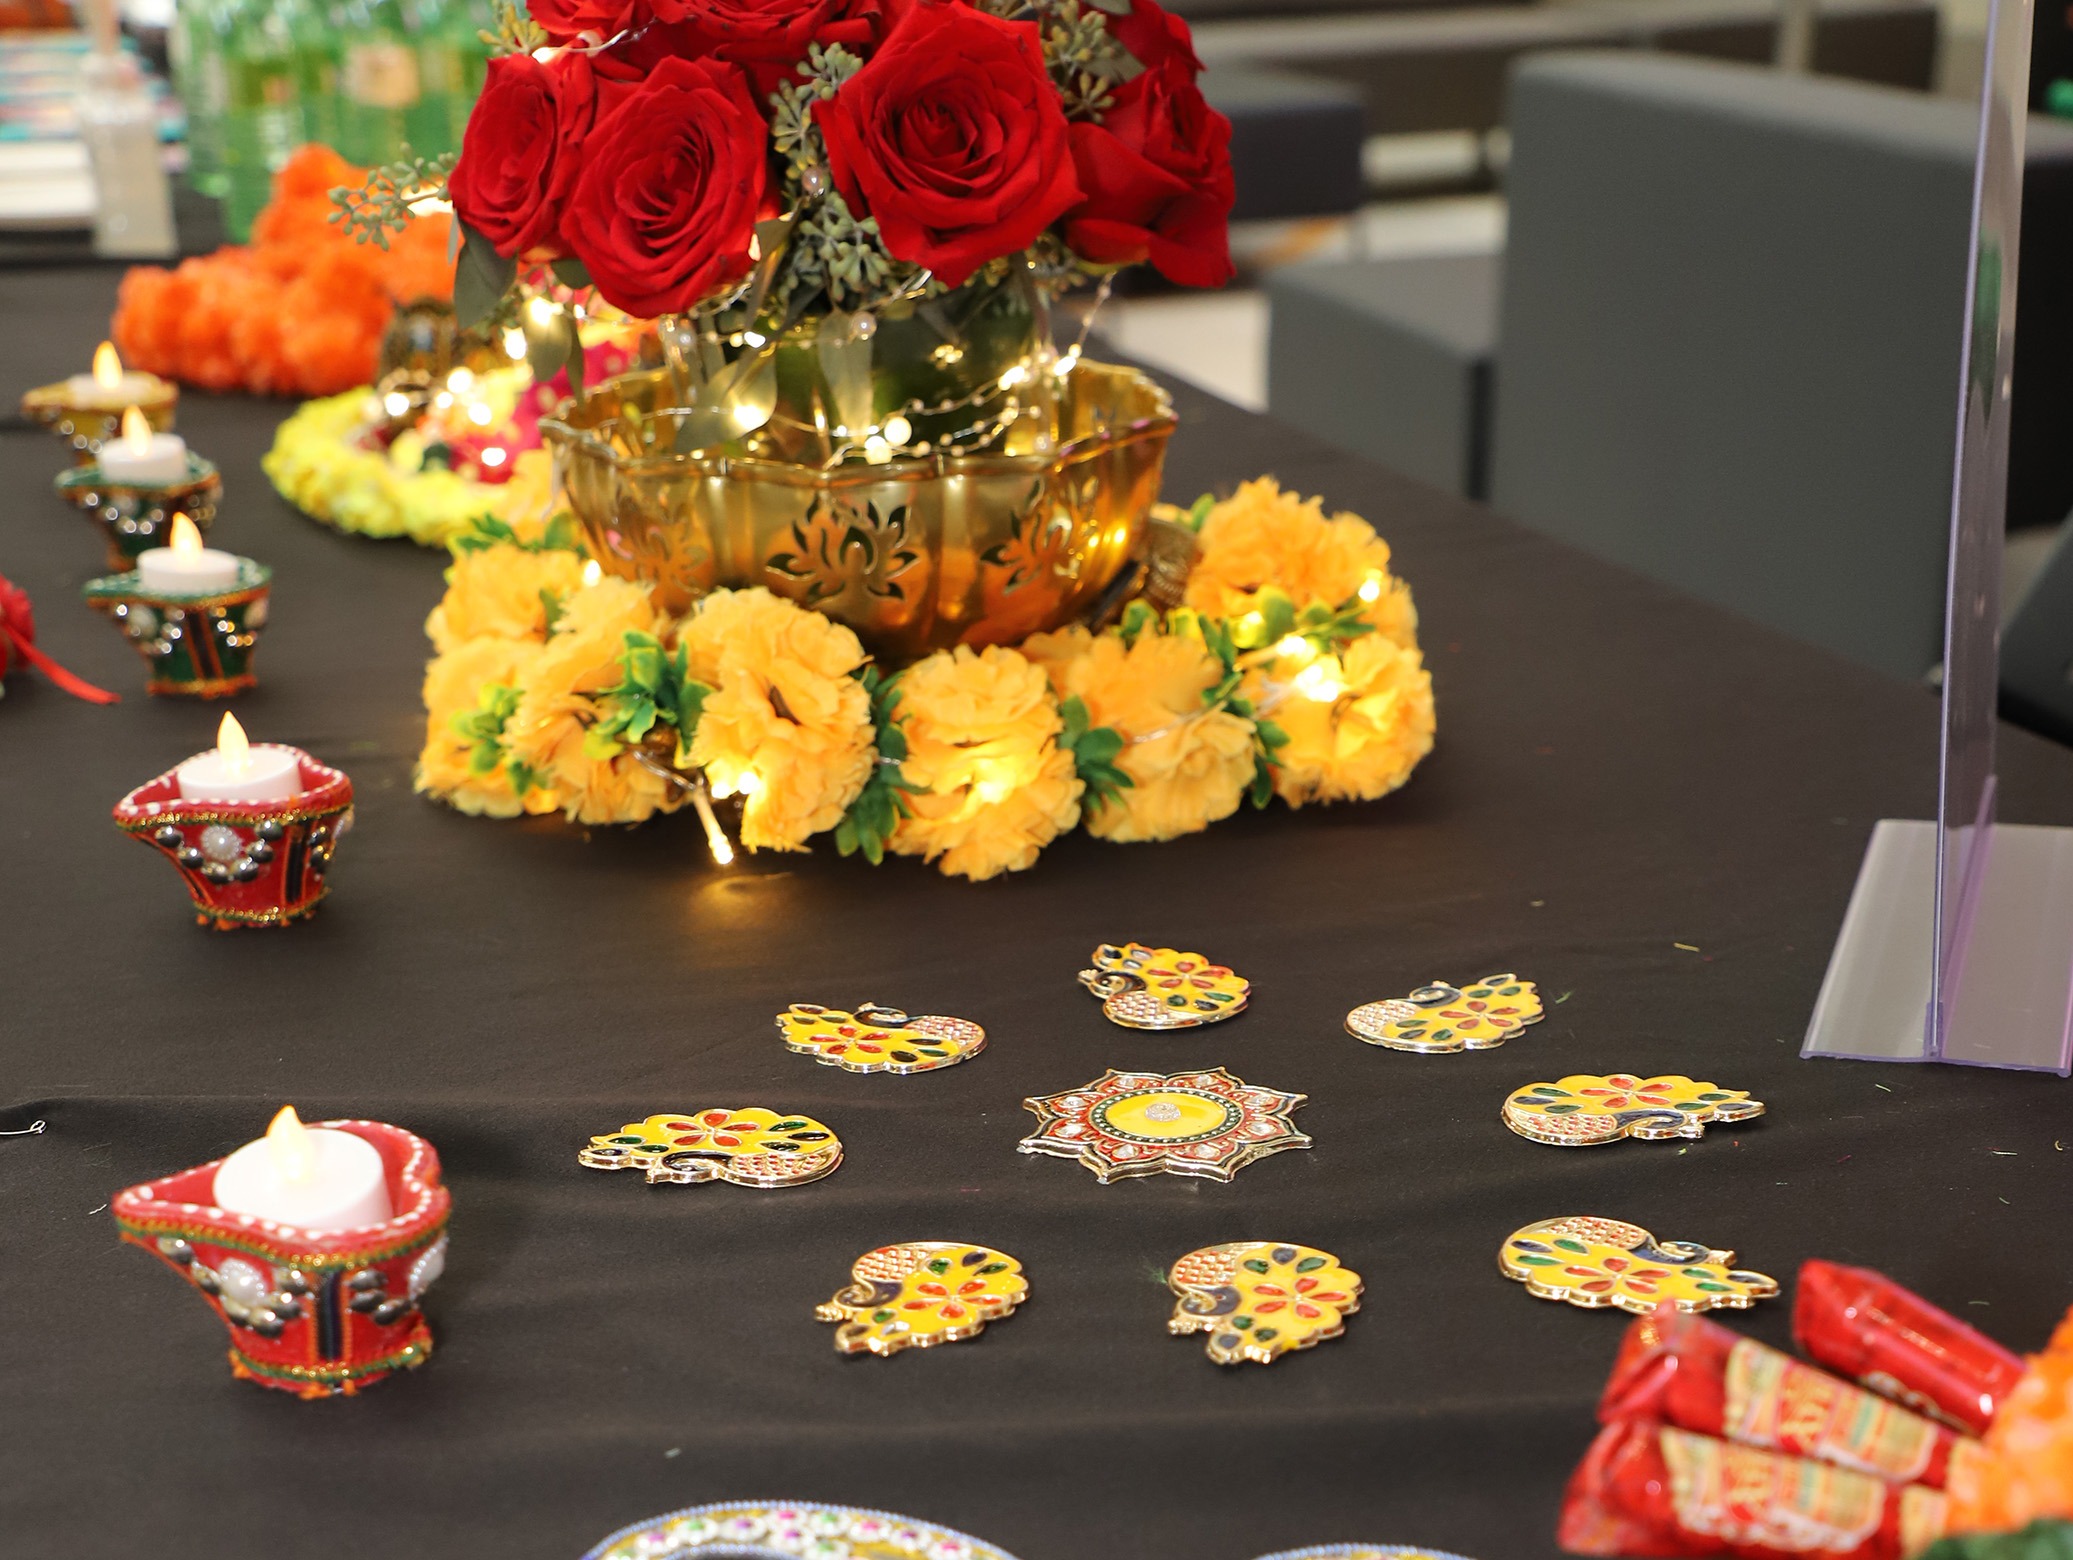 Roses, marigolds and diwali candles on a table